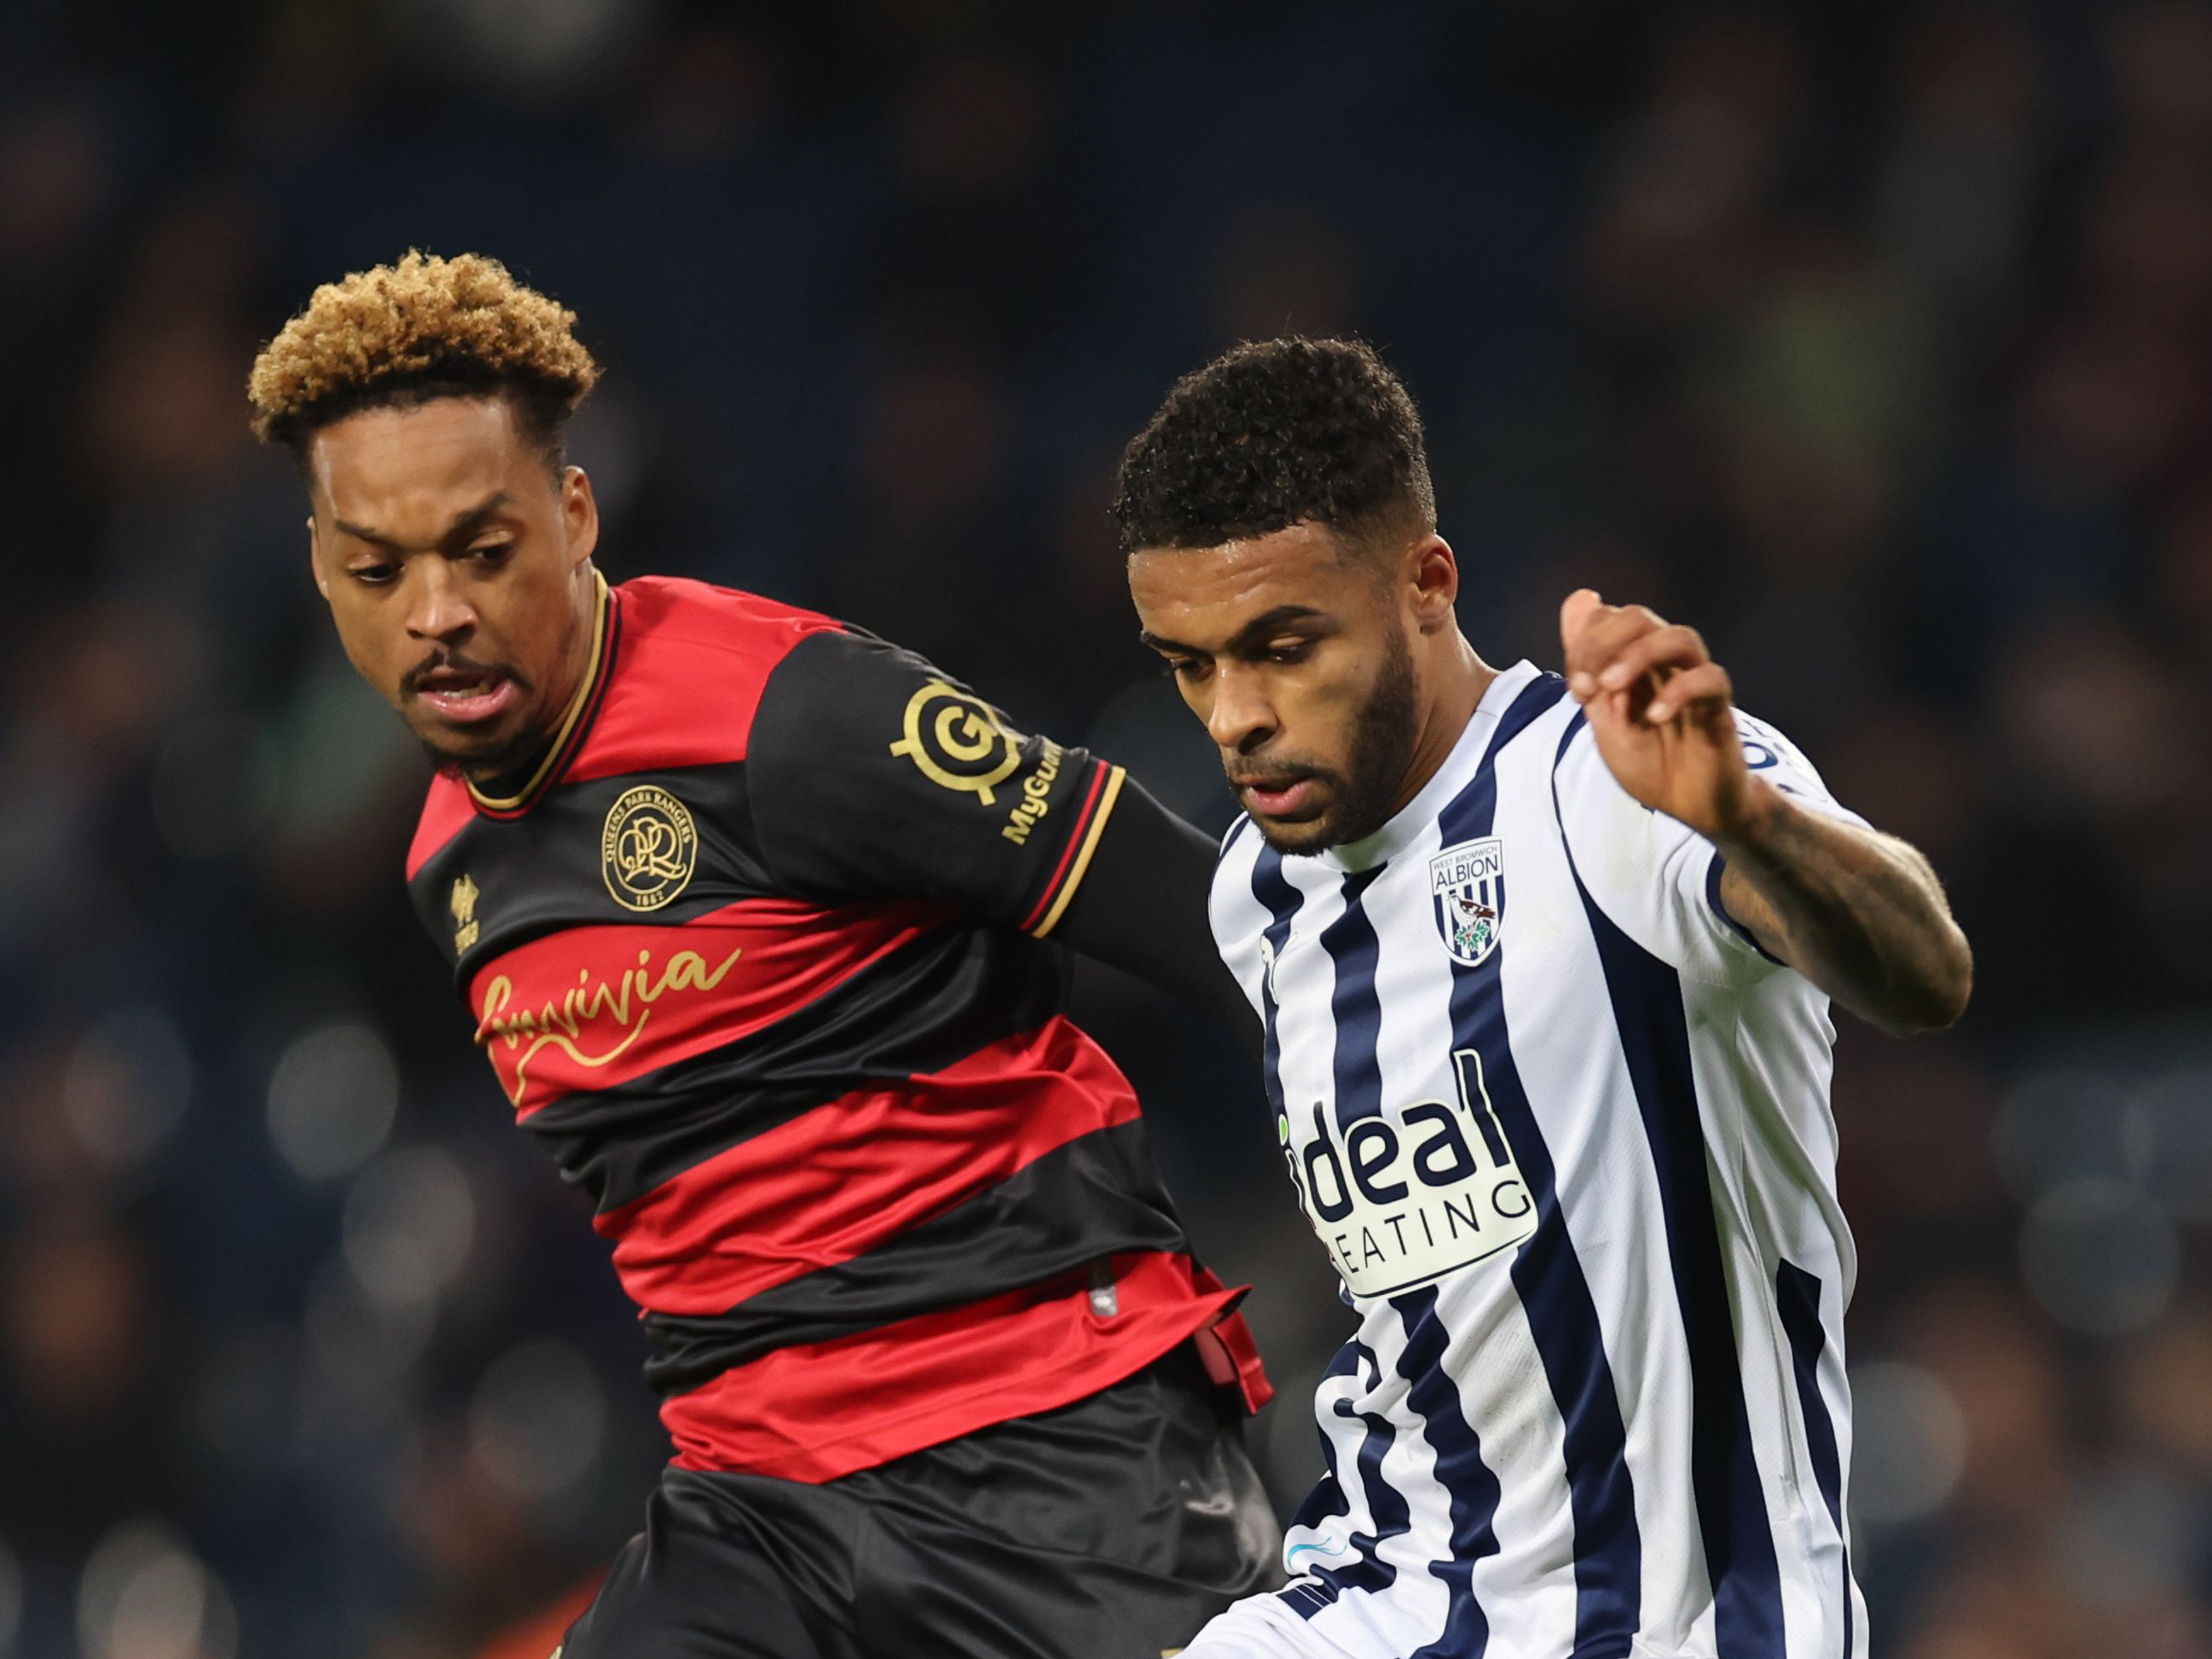 Darnell Furlong fights off QPR's Chris Willock at The Hawthorns